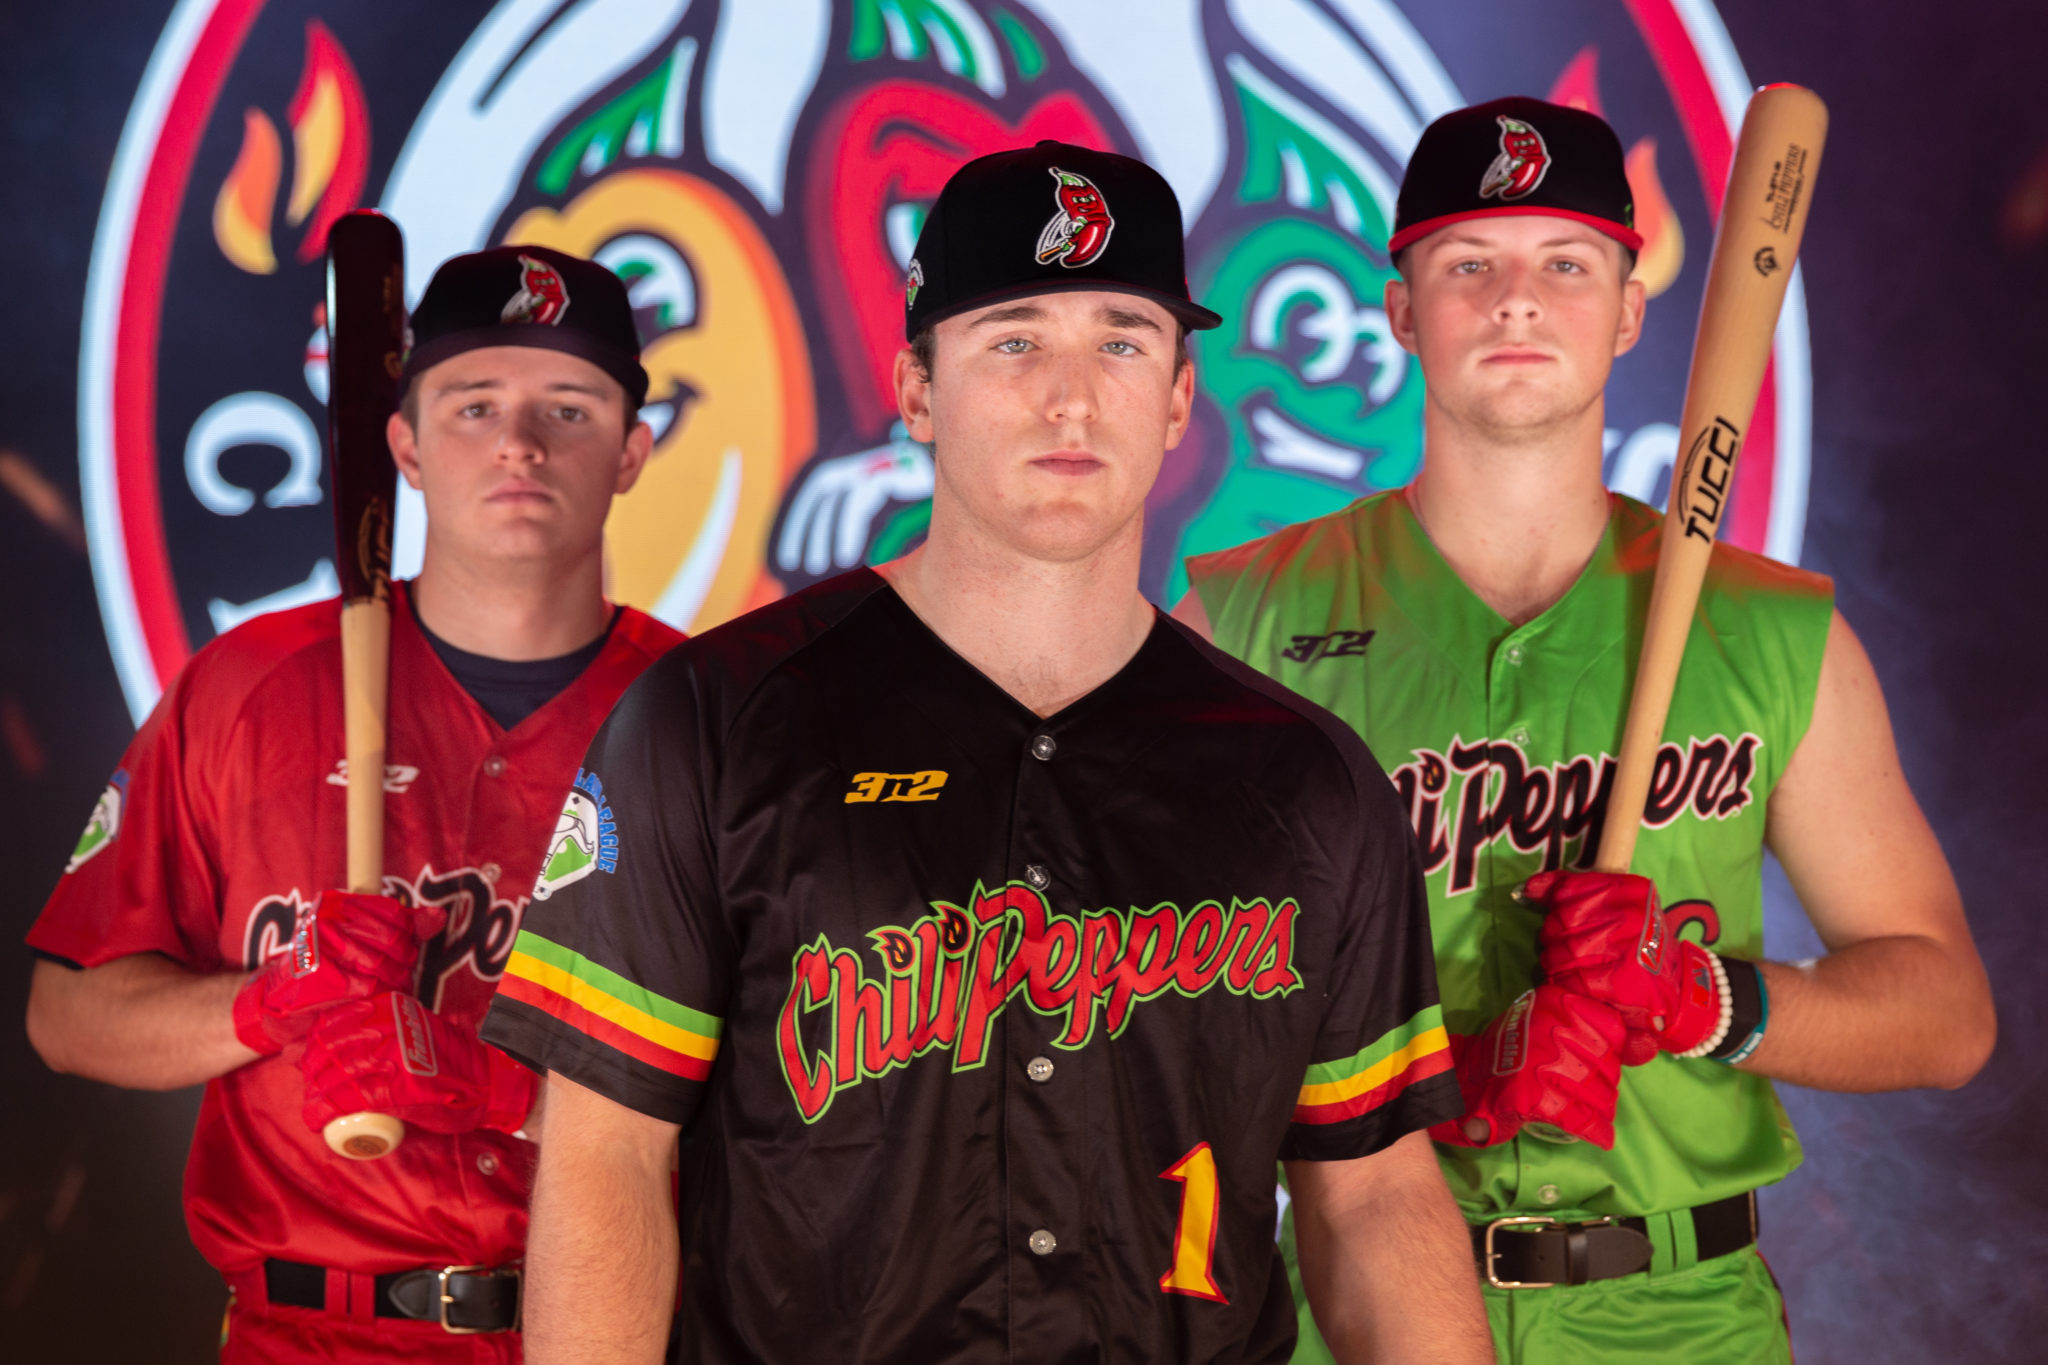 TriCity Chili Peppers Debut Jerseys For Inaugural Season